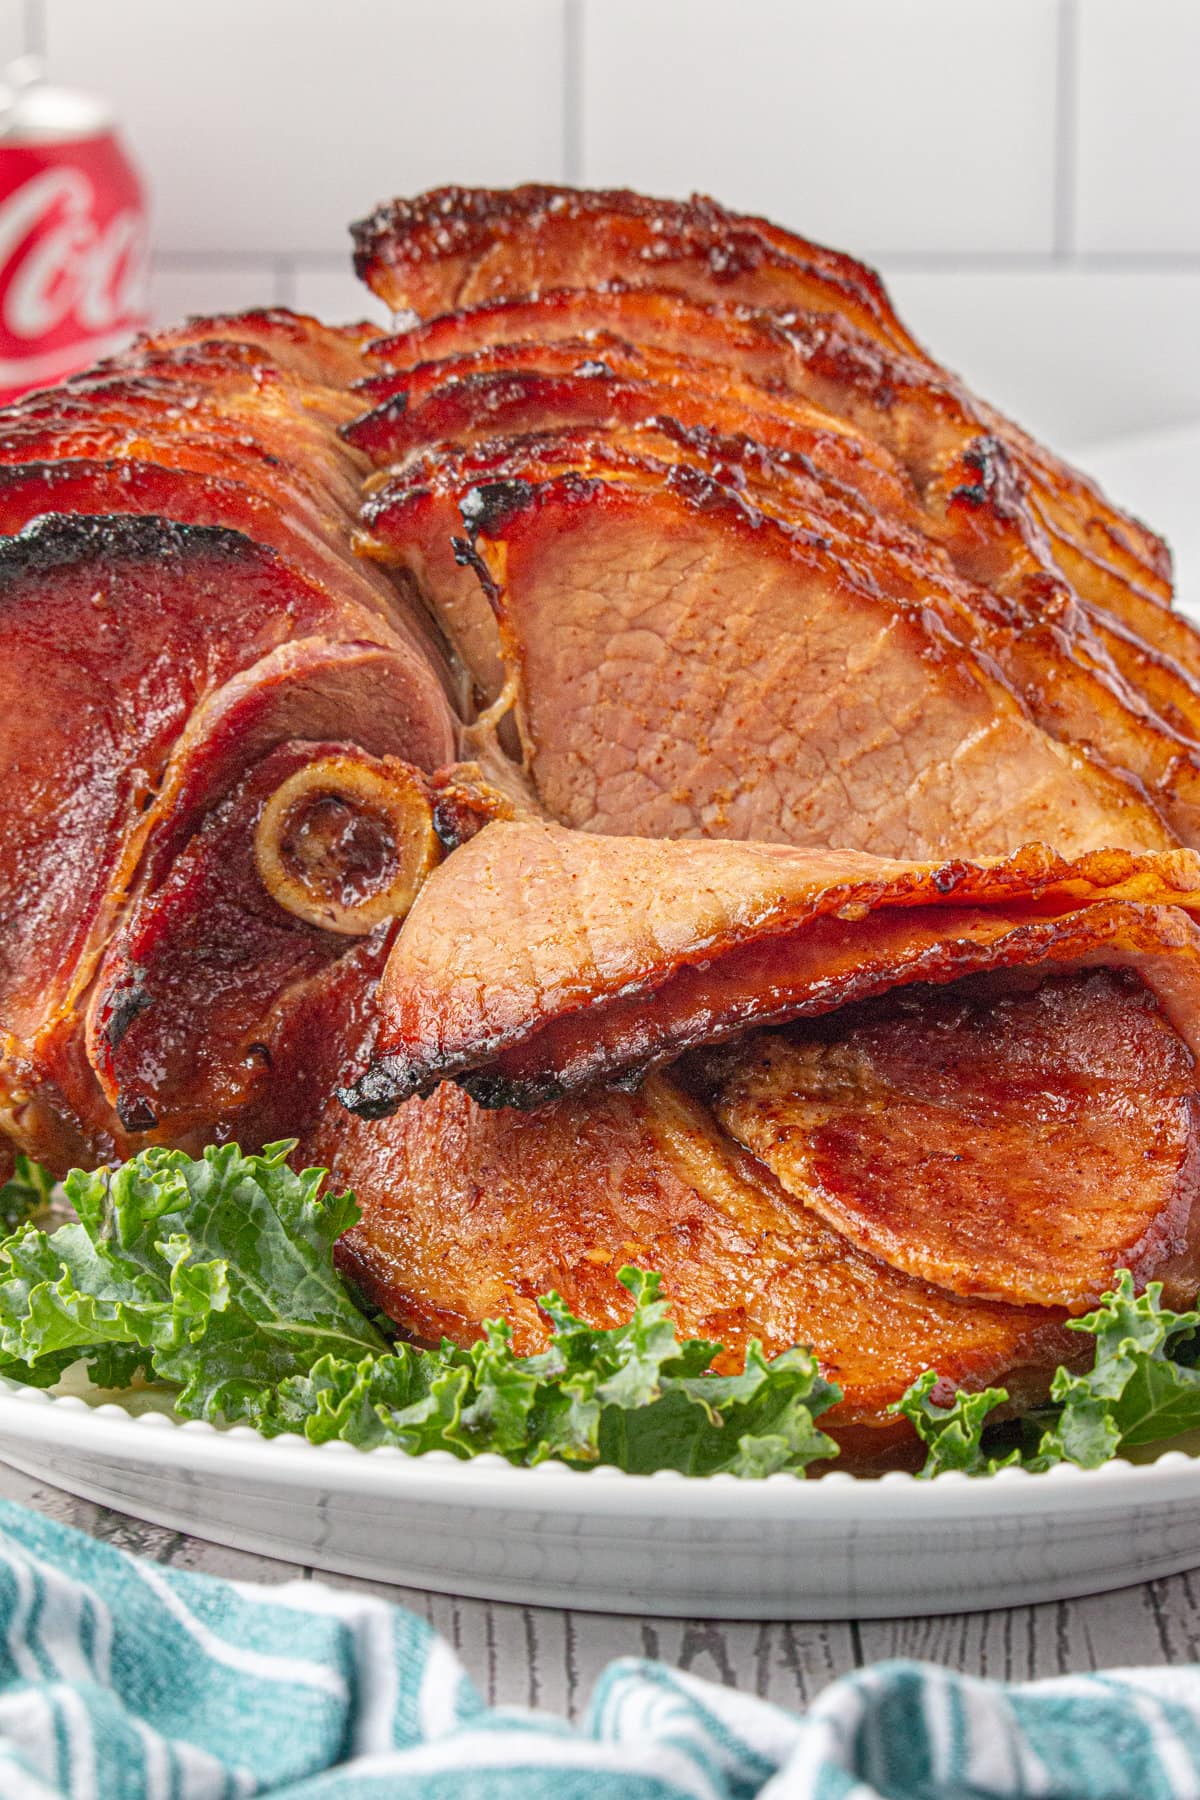 A spiral-cut ham, sliced with caramelized, glazed edges, sits on a platter and a coca-cola can is featured in the background.